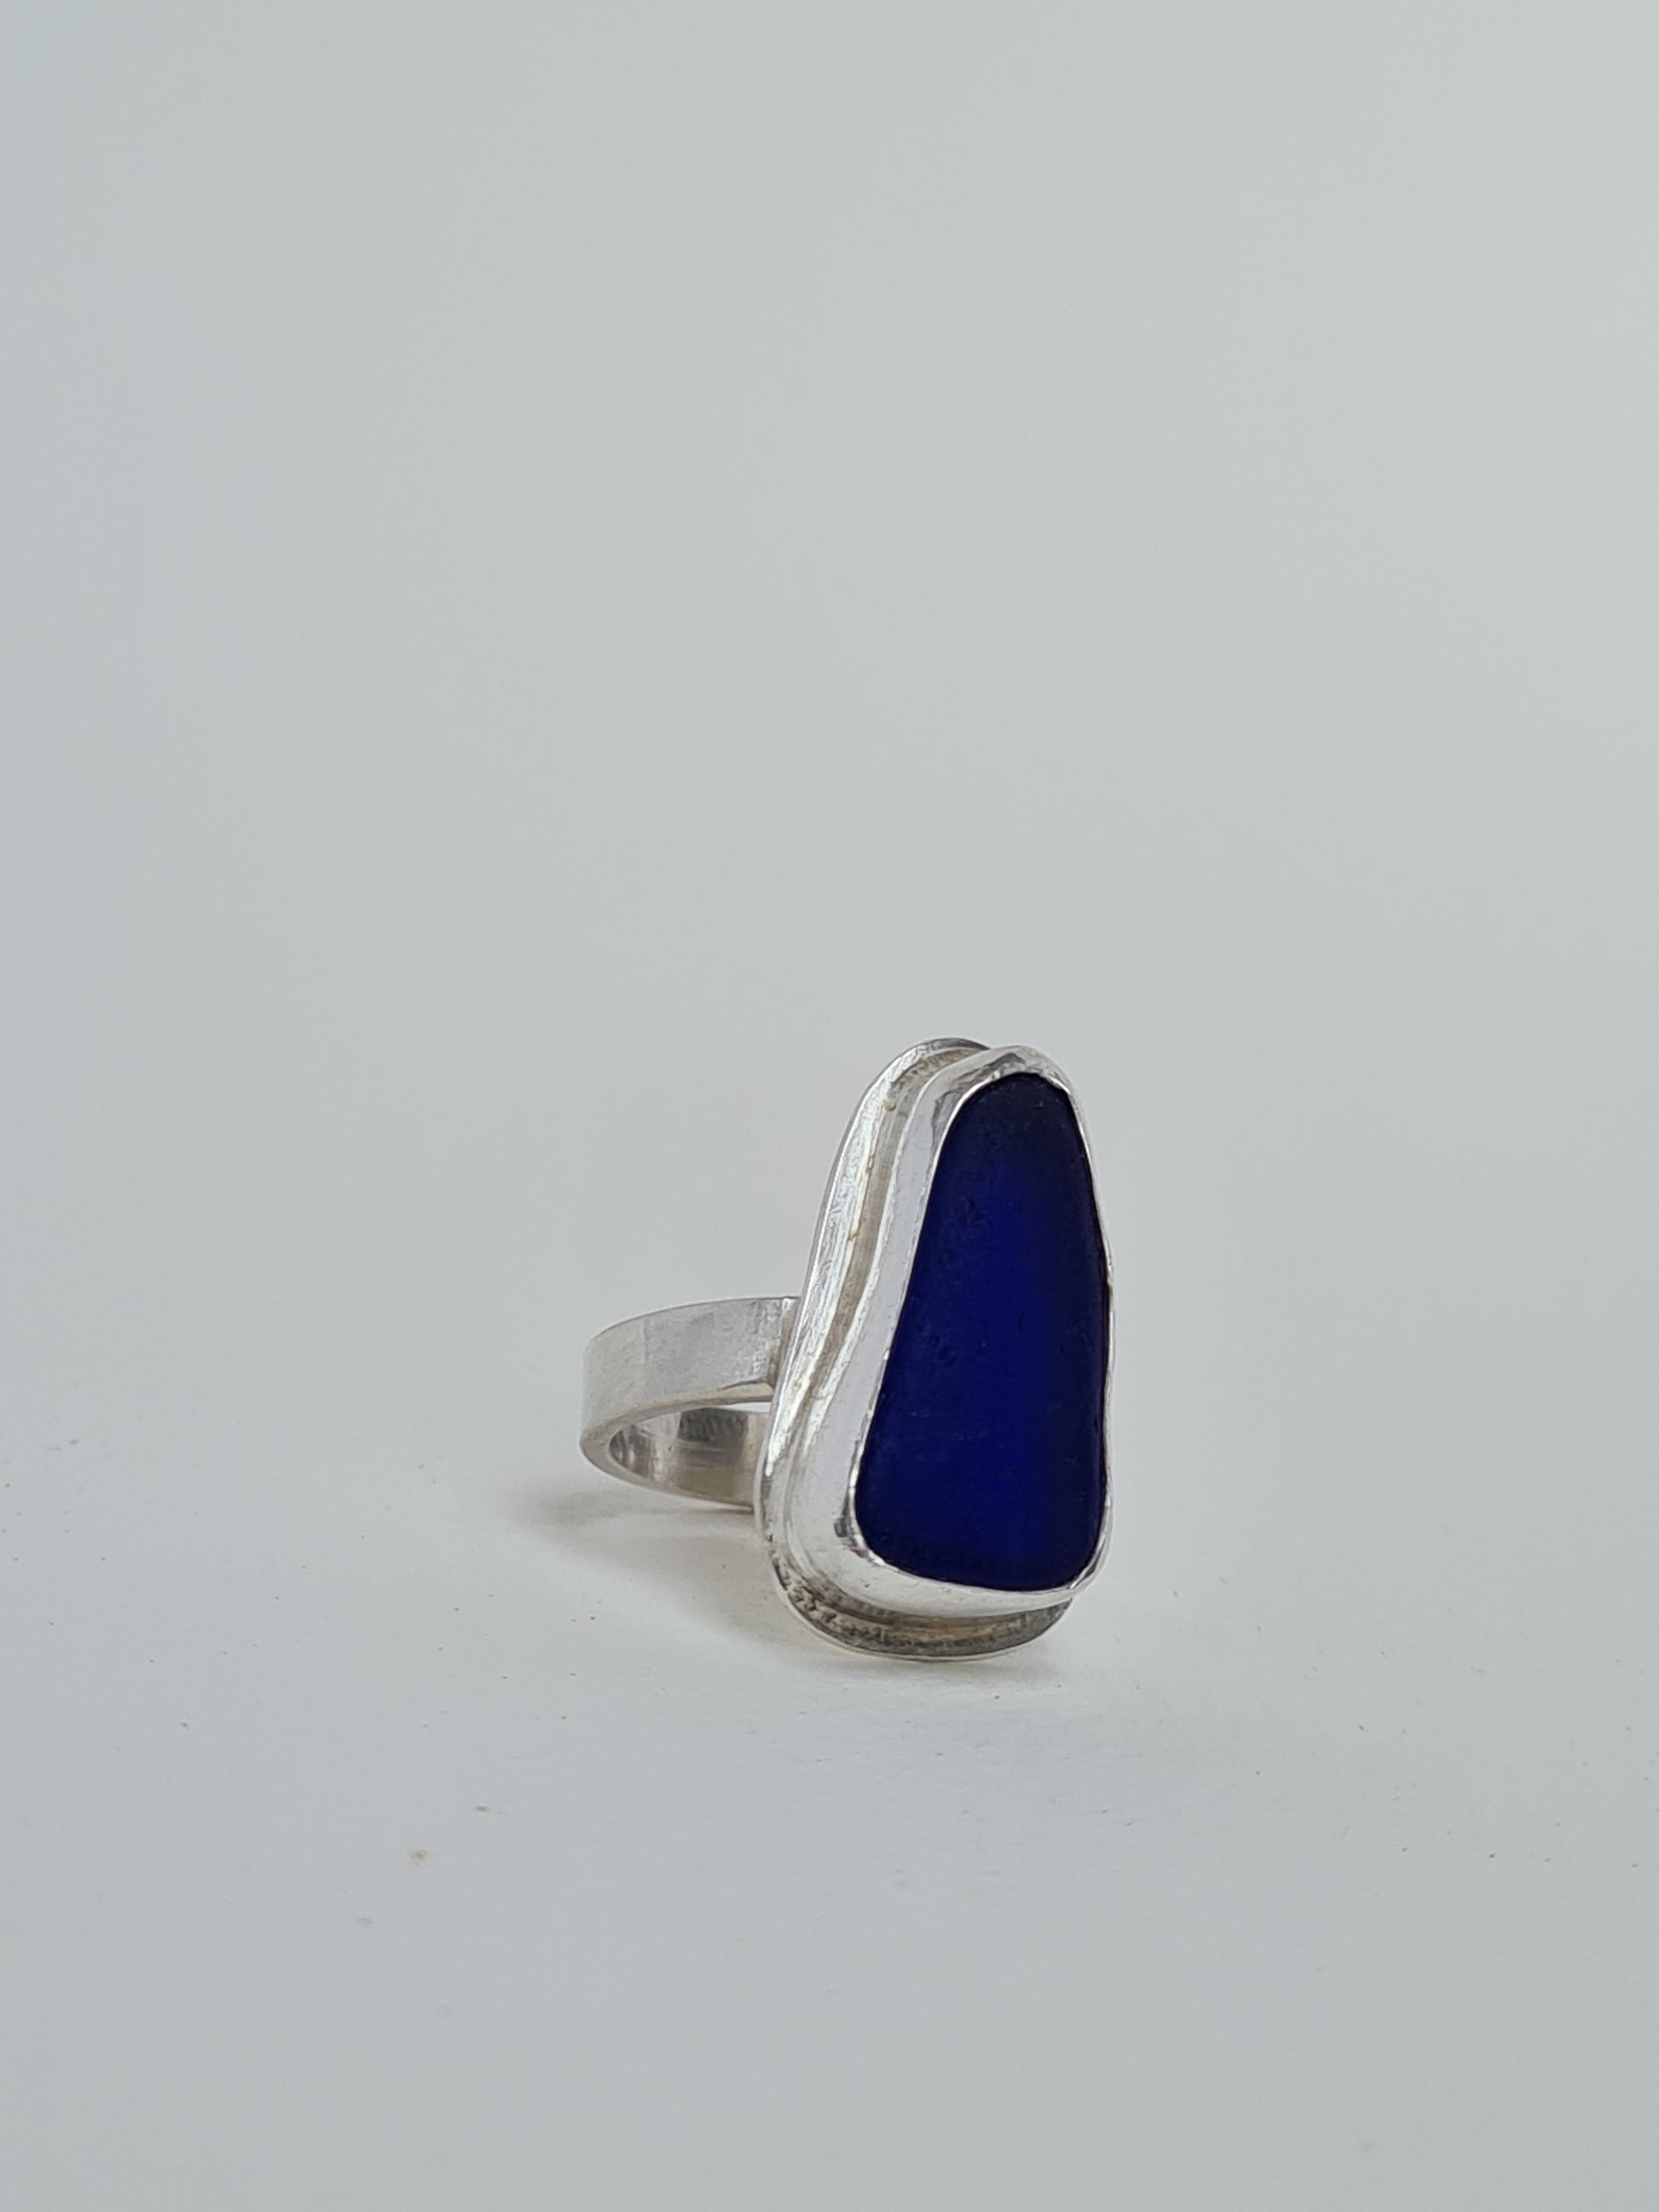 This rare and beautiful blue sea glass is cradled in a sterling silver bezel set upon a thick band. Made with sustainability in mind this handmade silver ring is made from 100% recycled silver.